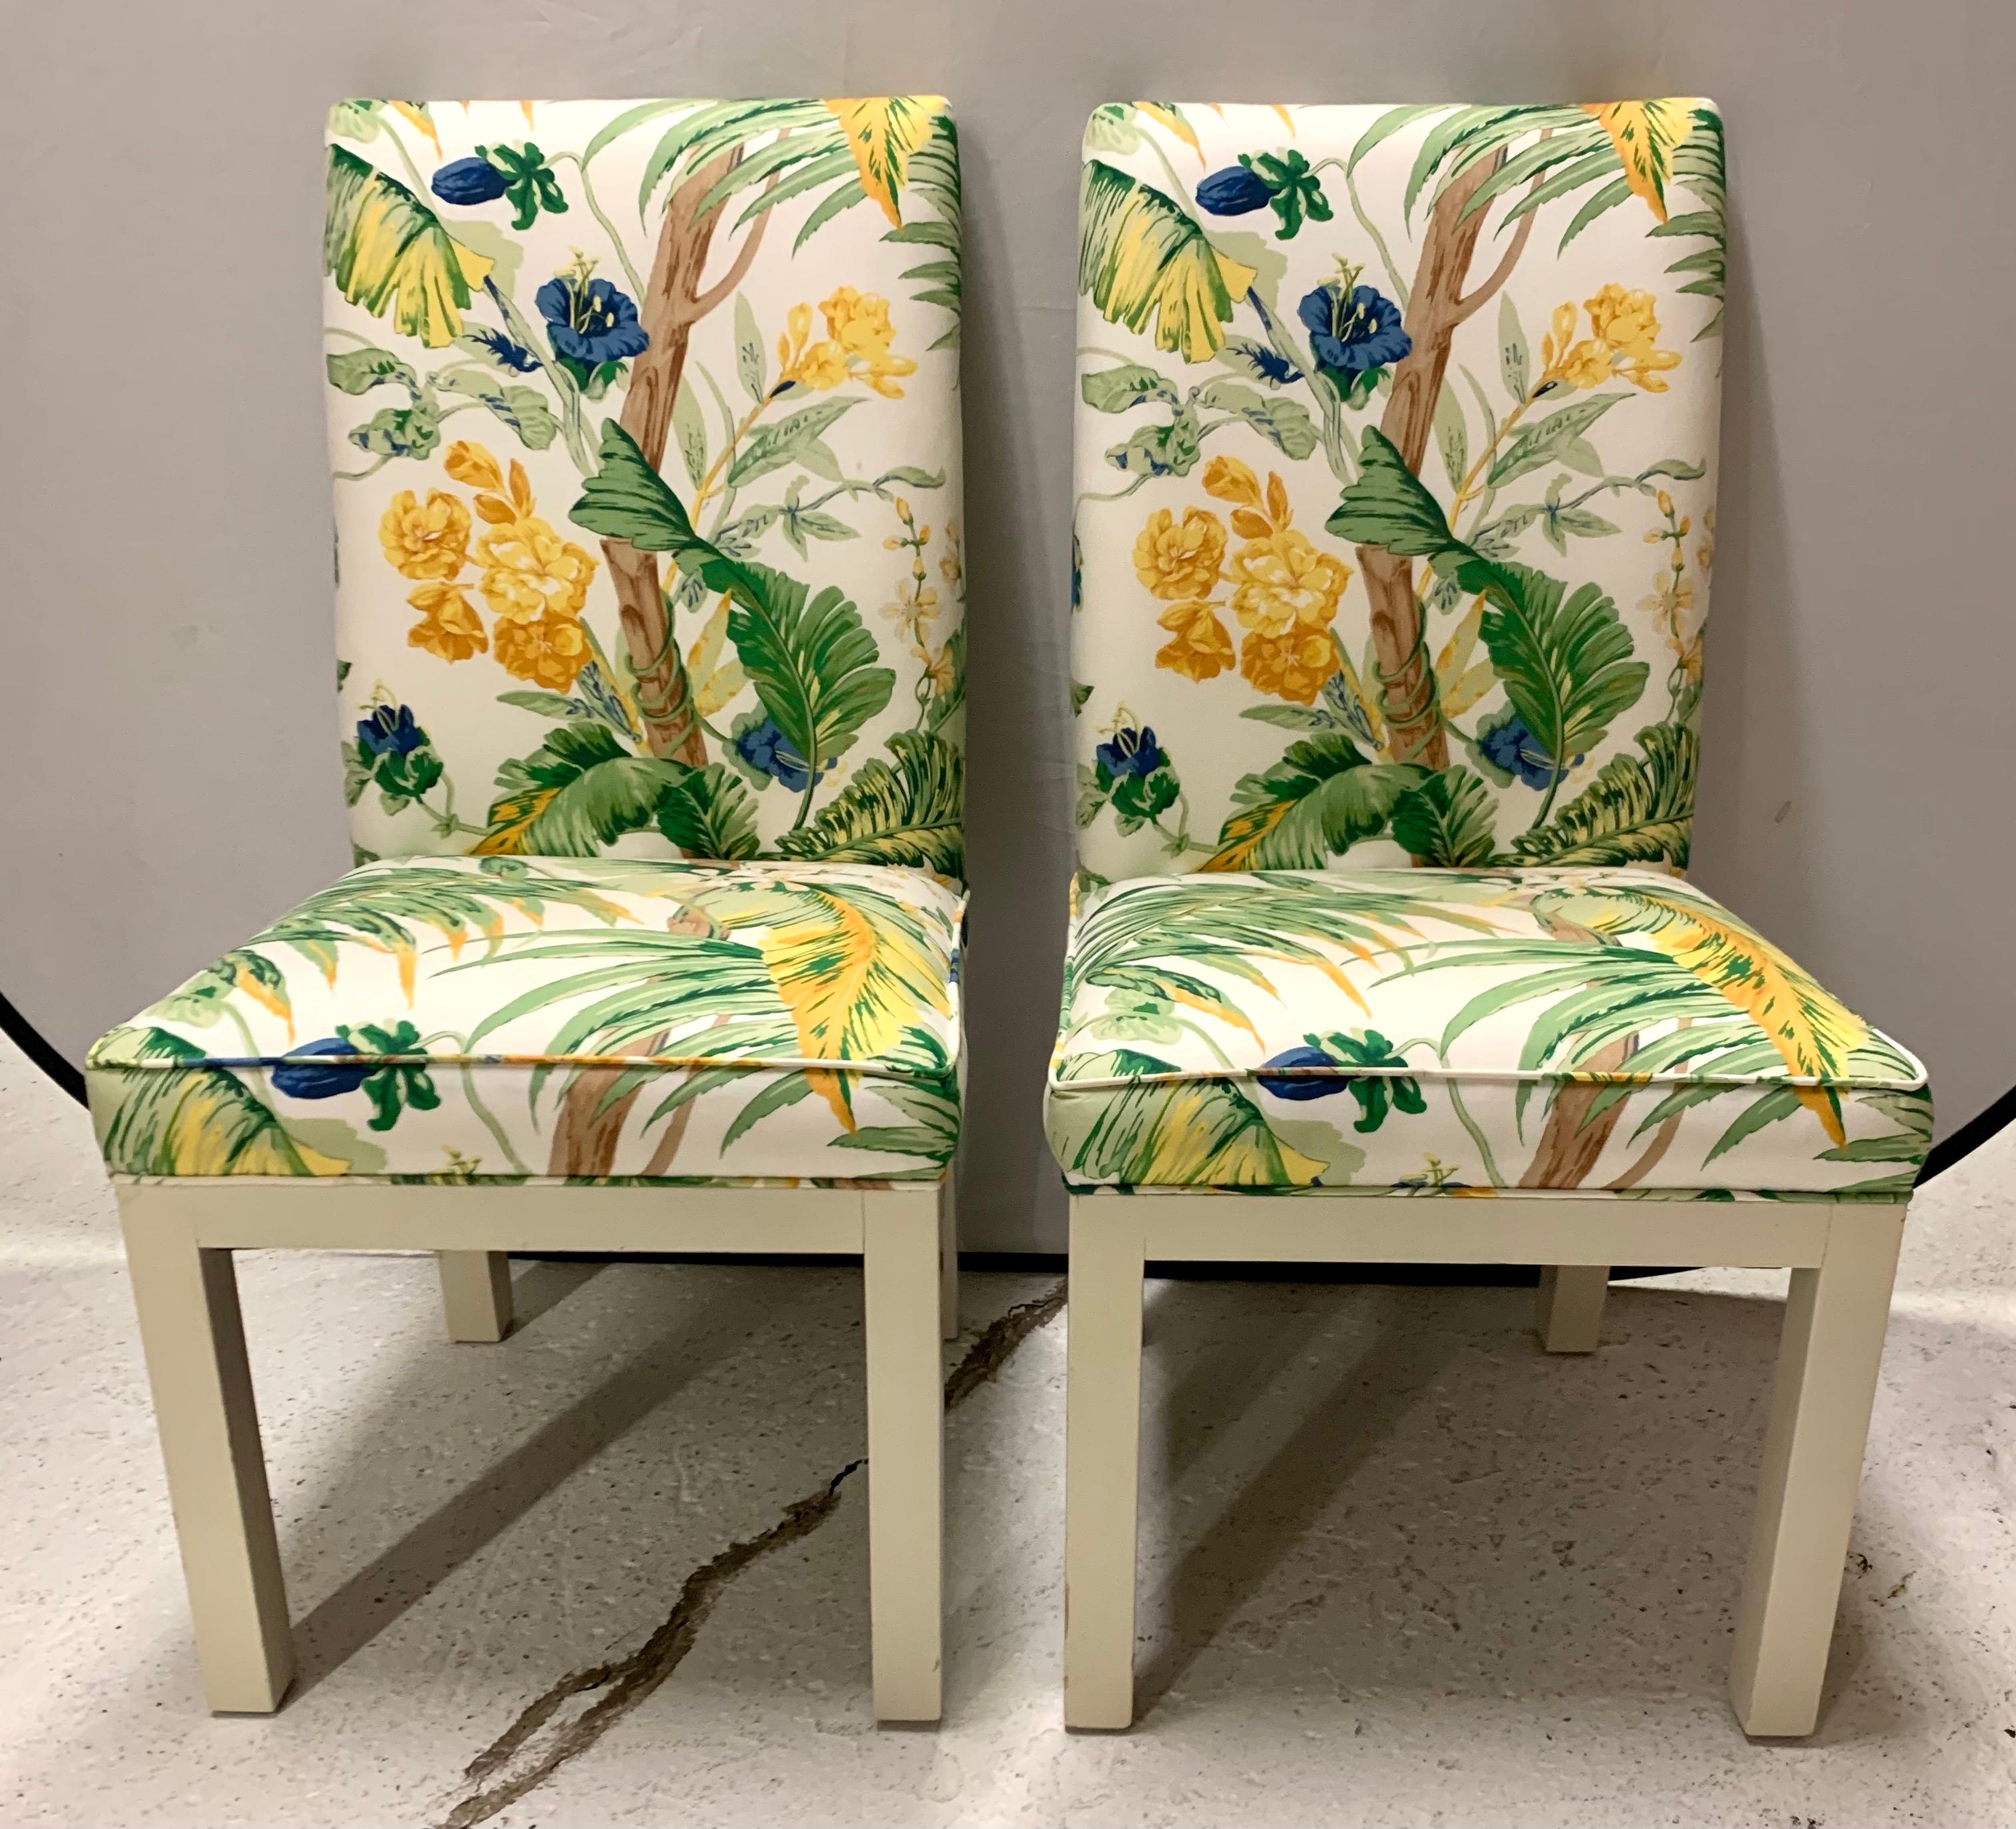 Fabulous set of six 1970's slipper chairs redone in a vibrant and gorgeous Lilly Pulitzer Lee Jofa fabric. The chairs scream 